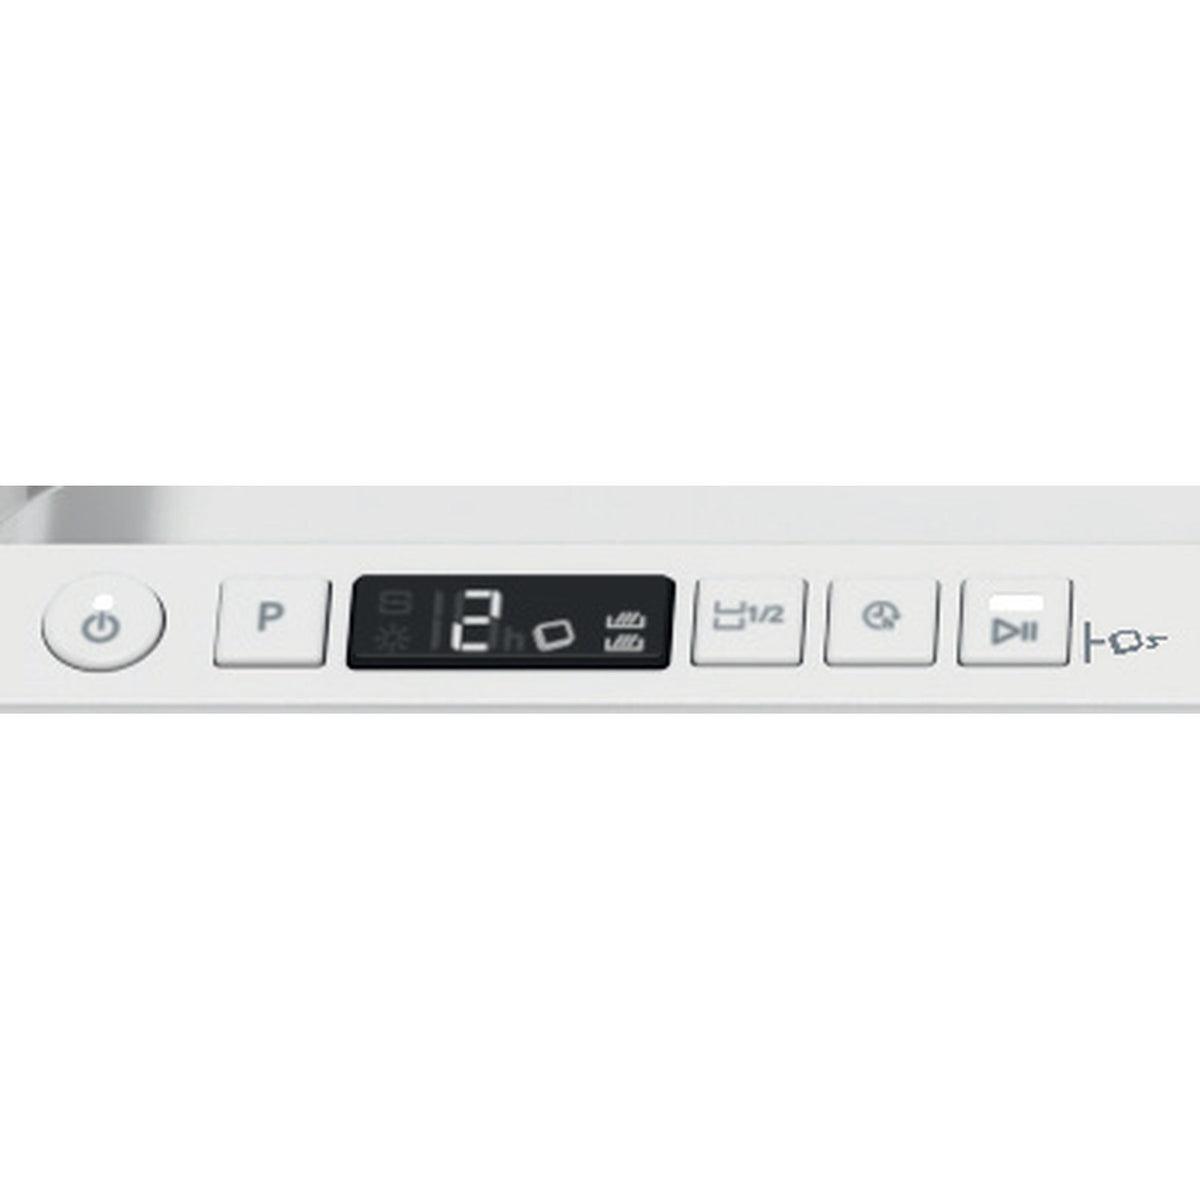 Whirlpool 14 Place Built-In Standard Dishwasher - White | W2IHD526UK from Whirlpool - DID Electrical